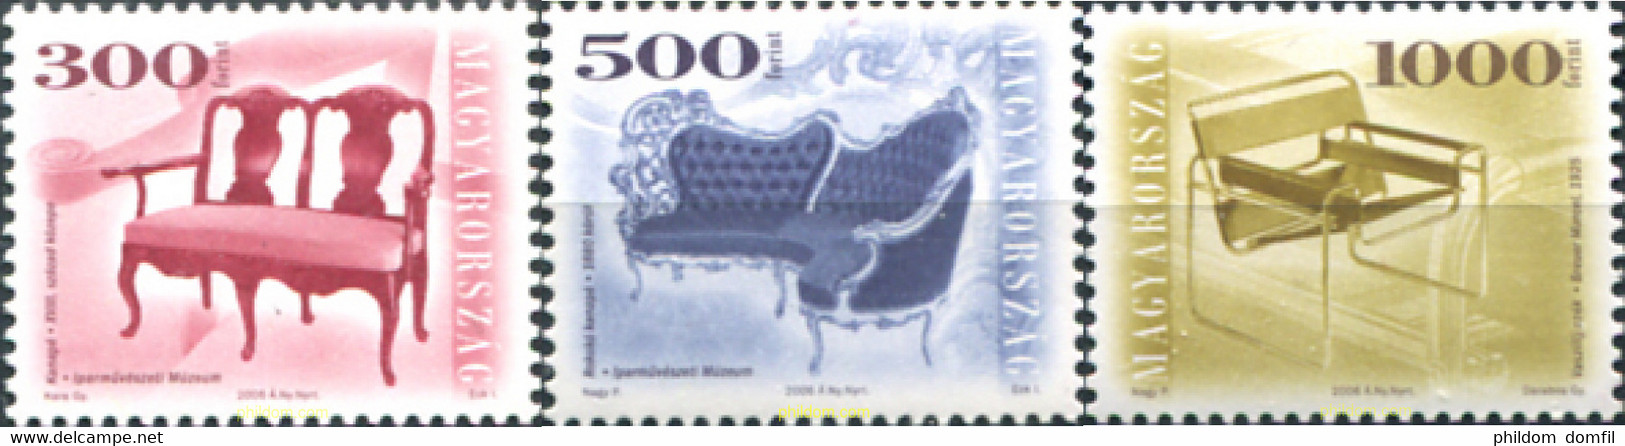 325277 MNH HUNGRIA 2006 MUEBLES - Used Stamps